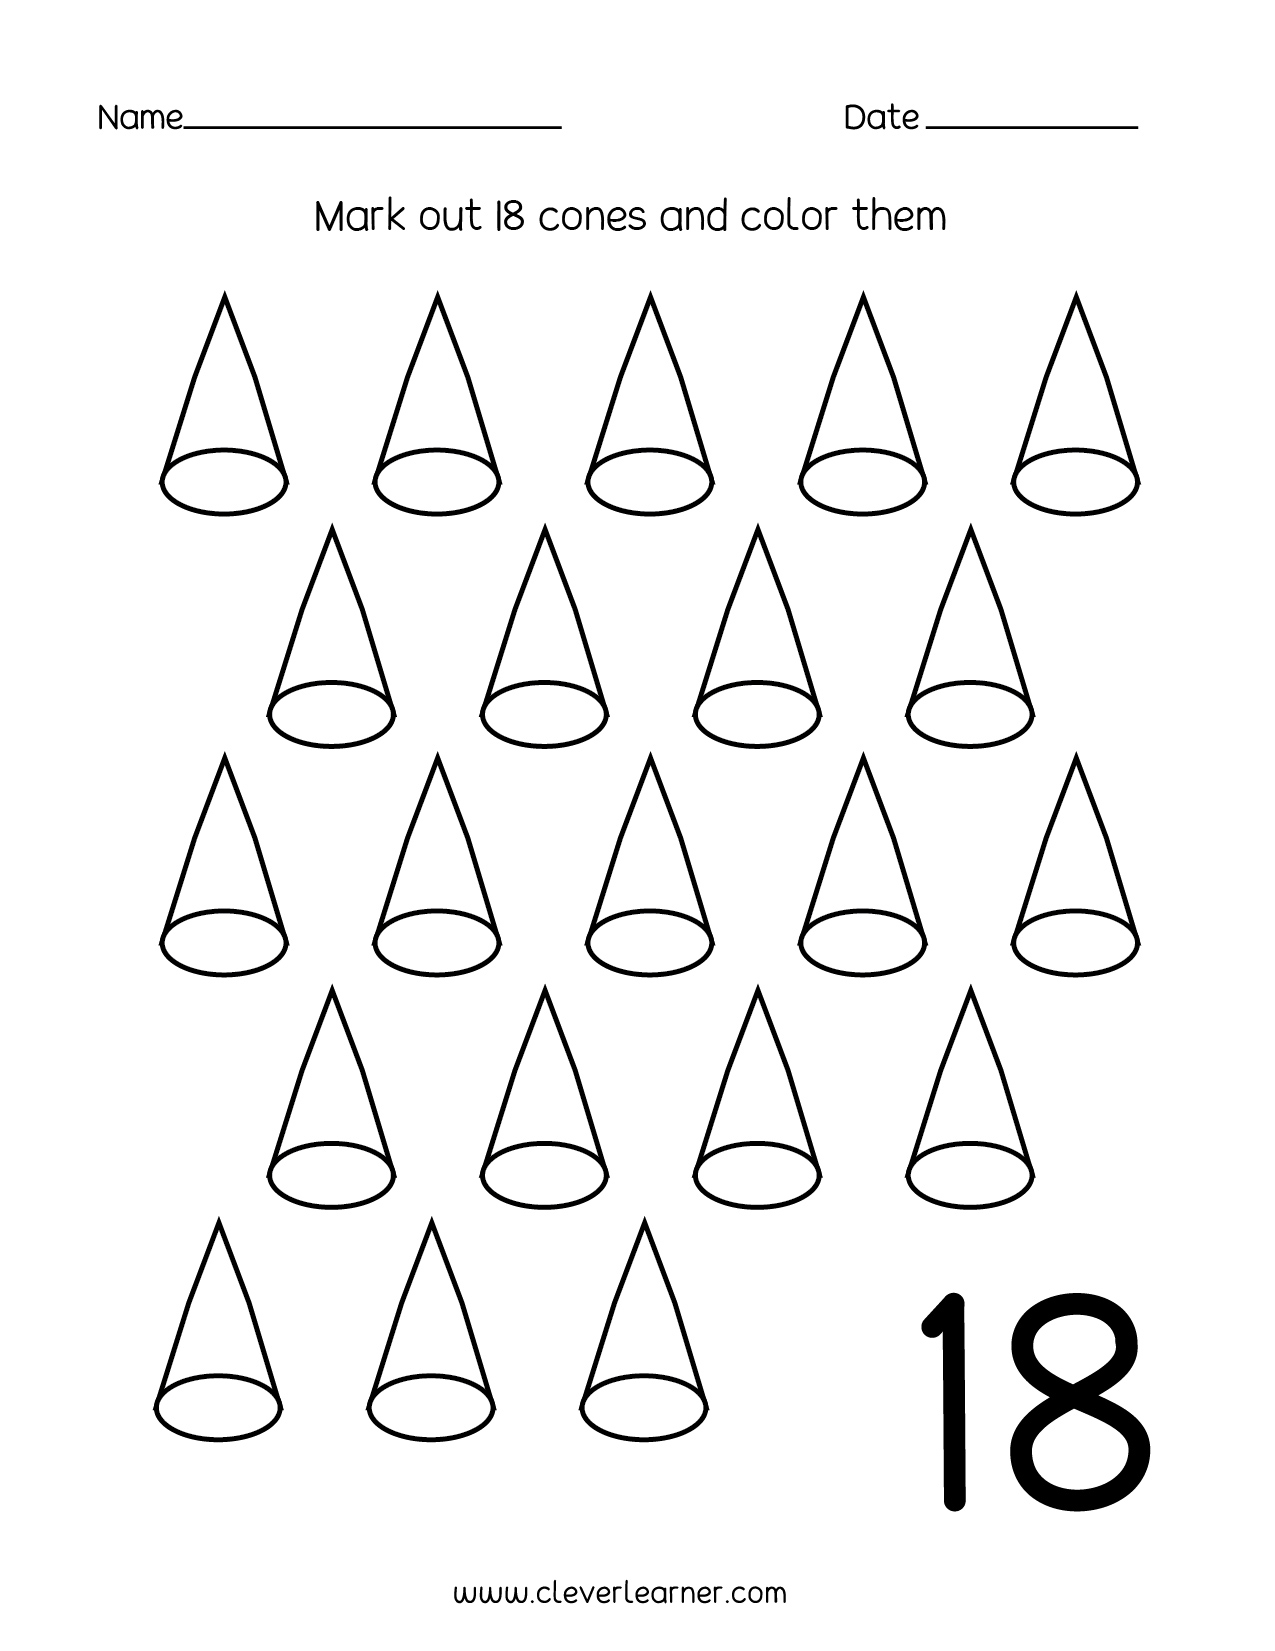 free-printable-number-18-eighteen-worksheets-for-kids-pdfs